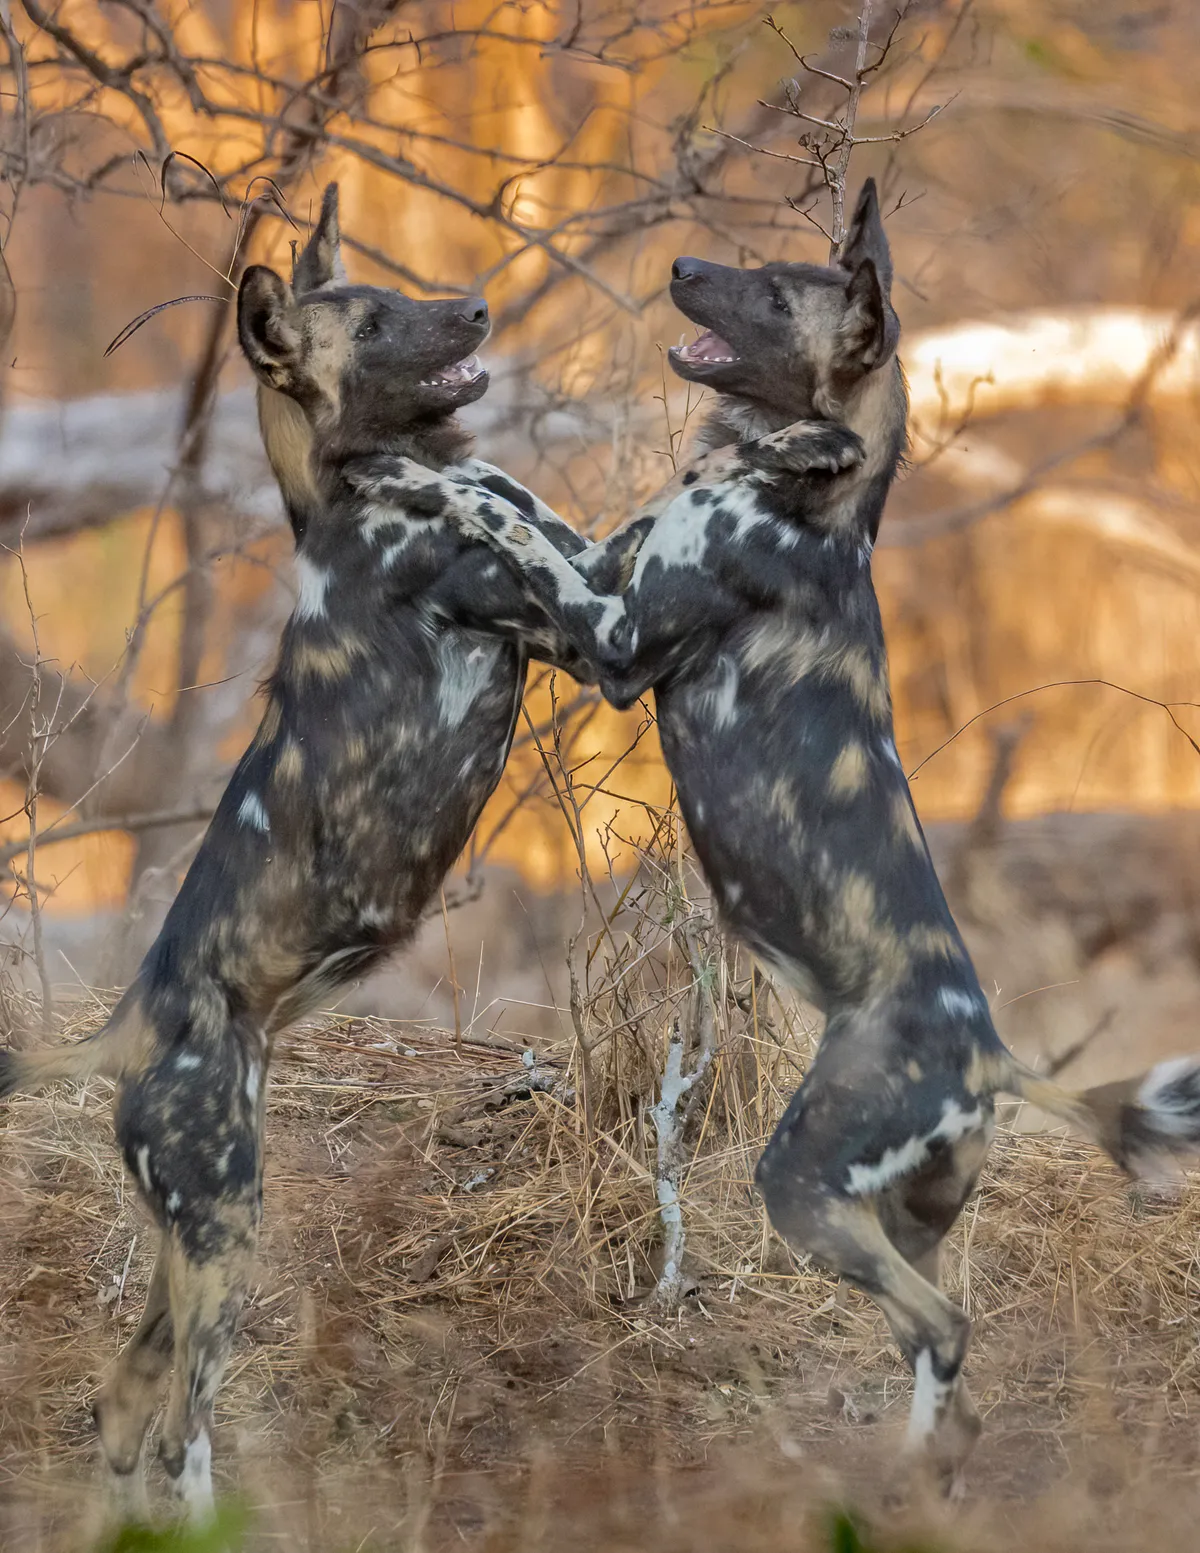 Two African wild dogs, on their hind legs, greet each other, with their front paws on each other’s shoulders, mouths open.